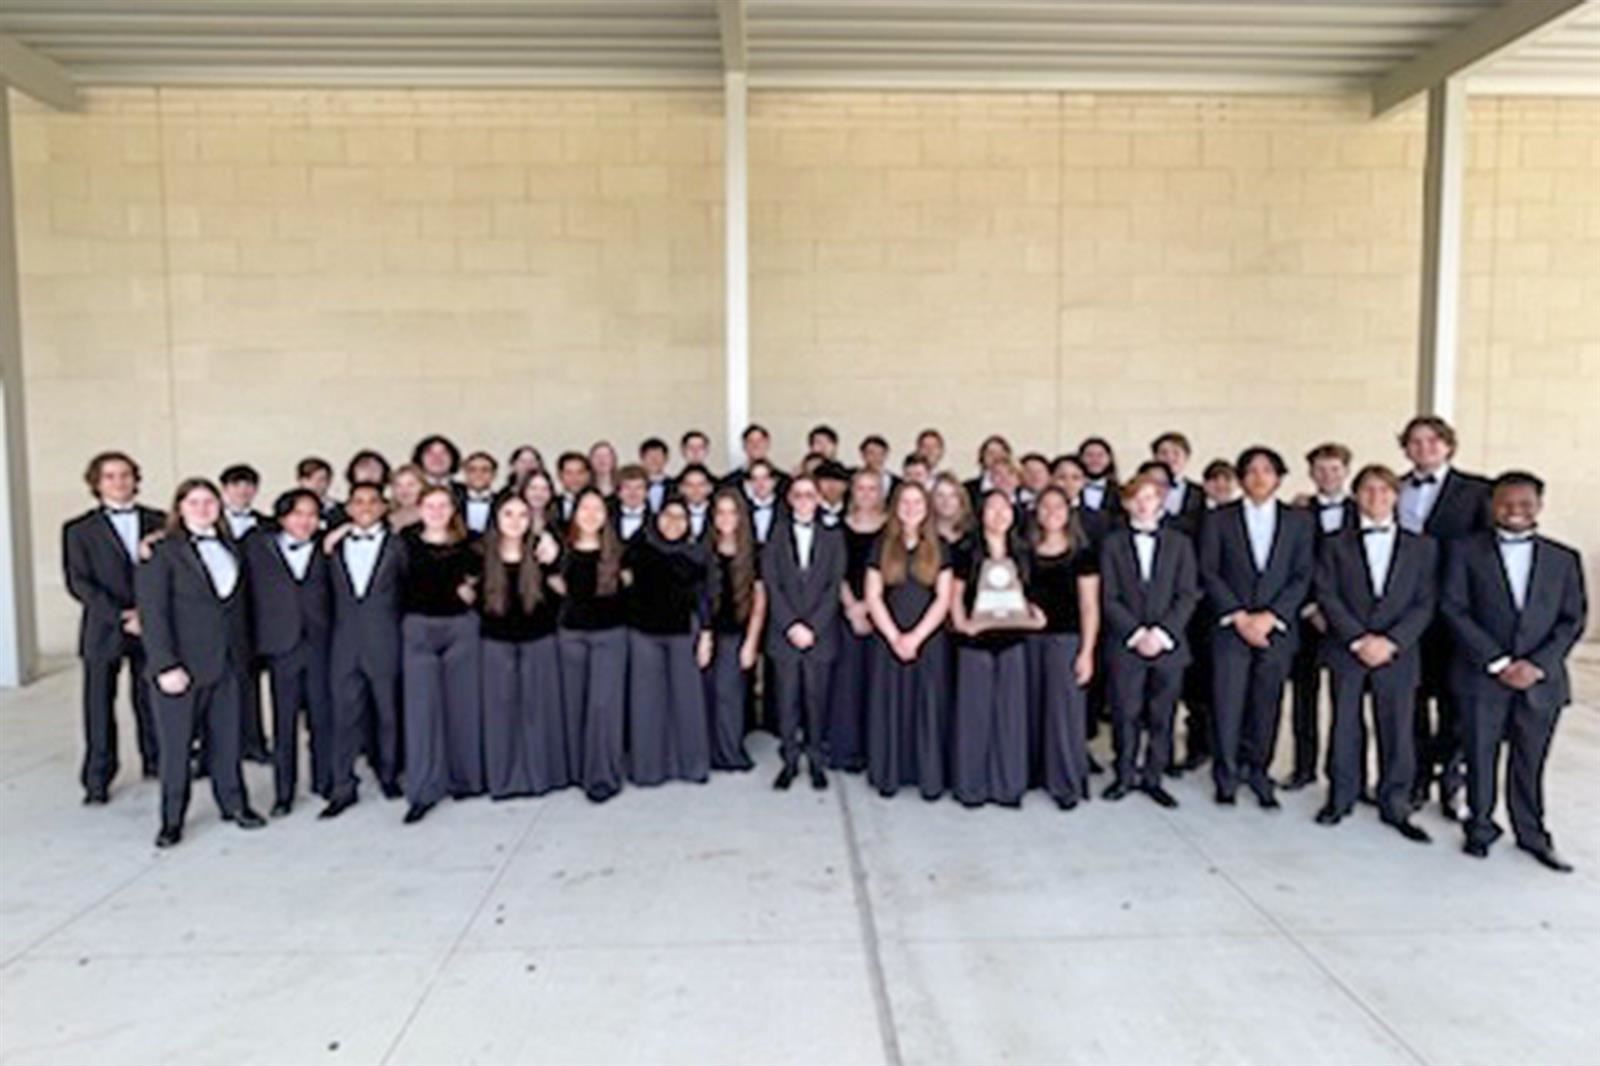 The Cypress Woods High School symphonic winds, directed by T.J. Peterman, earned a Citation of Excellence.